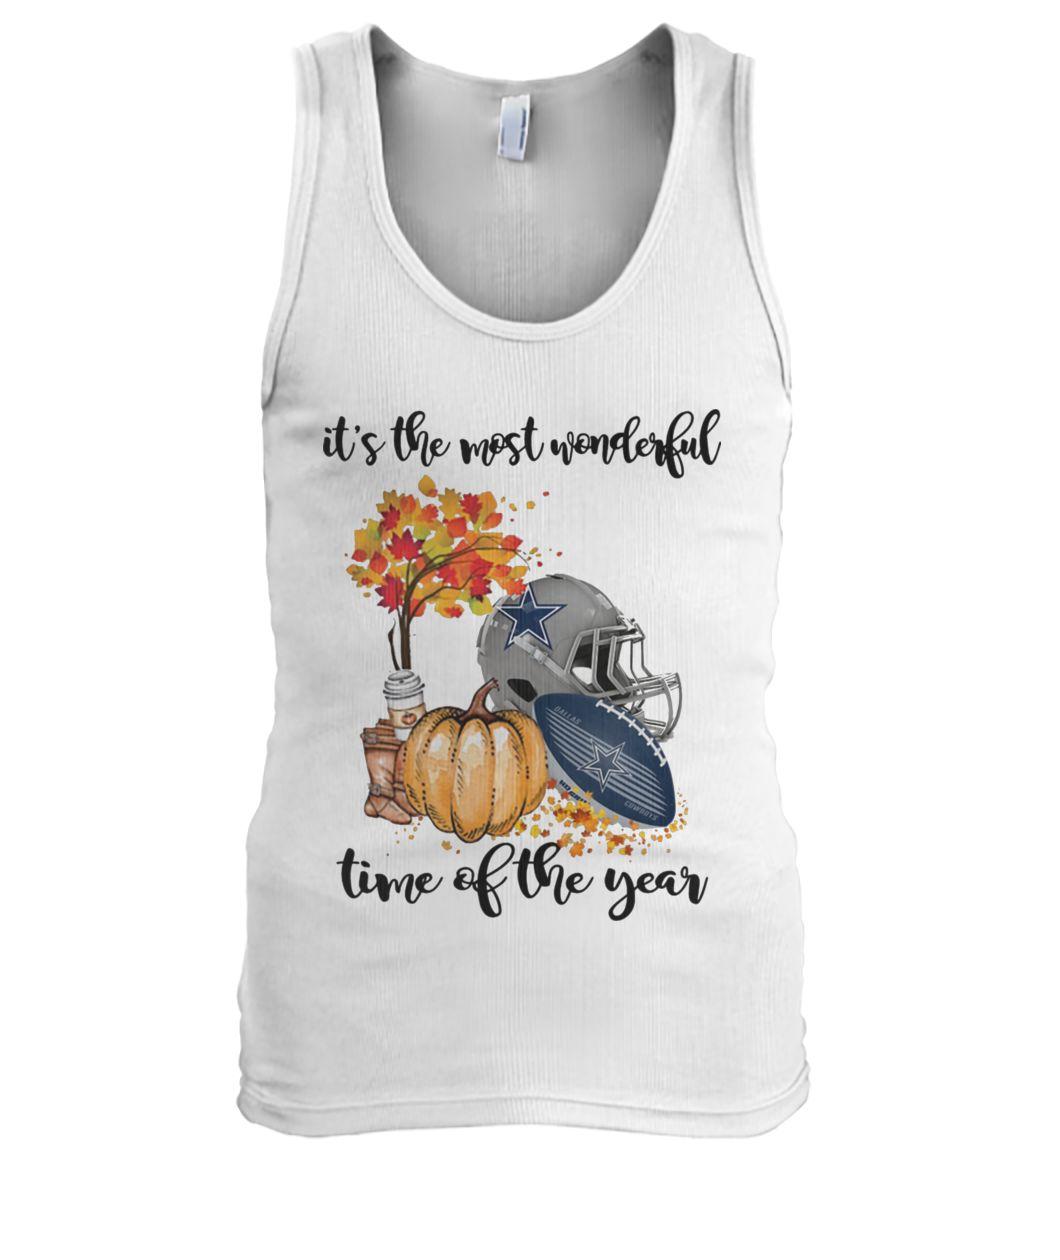 It’s the most wonderful time of the year dallas cowboys tank top